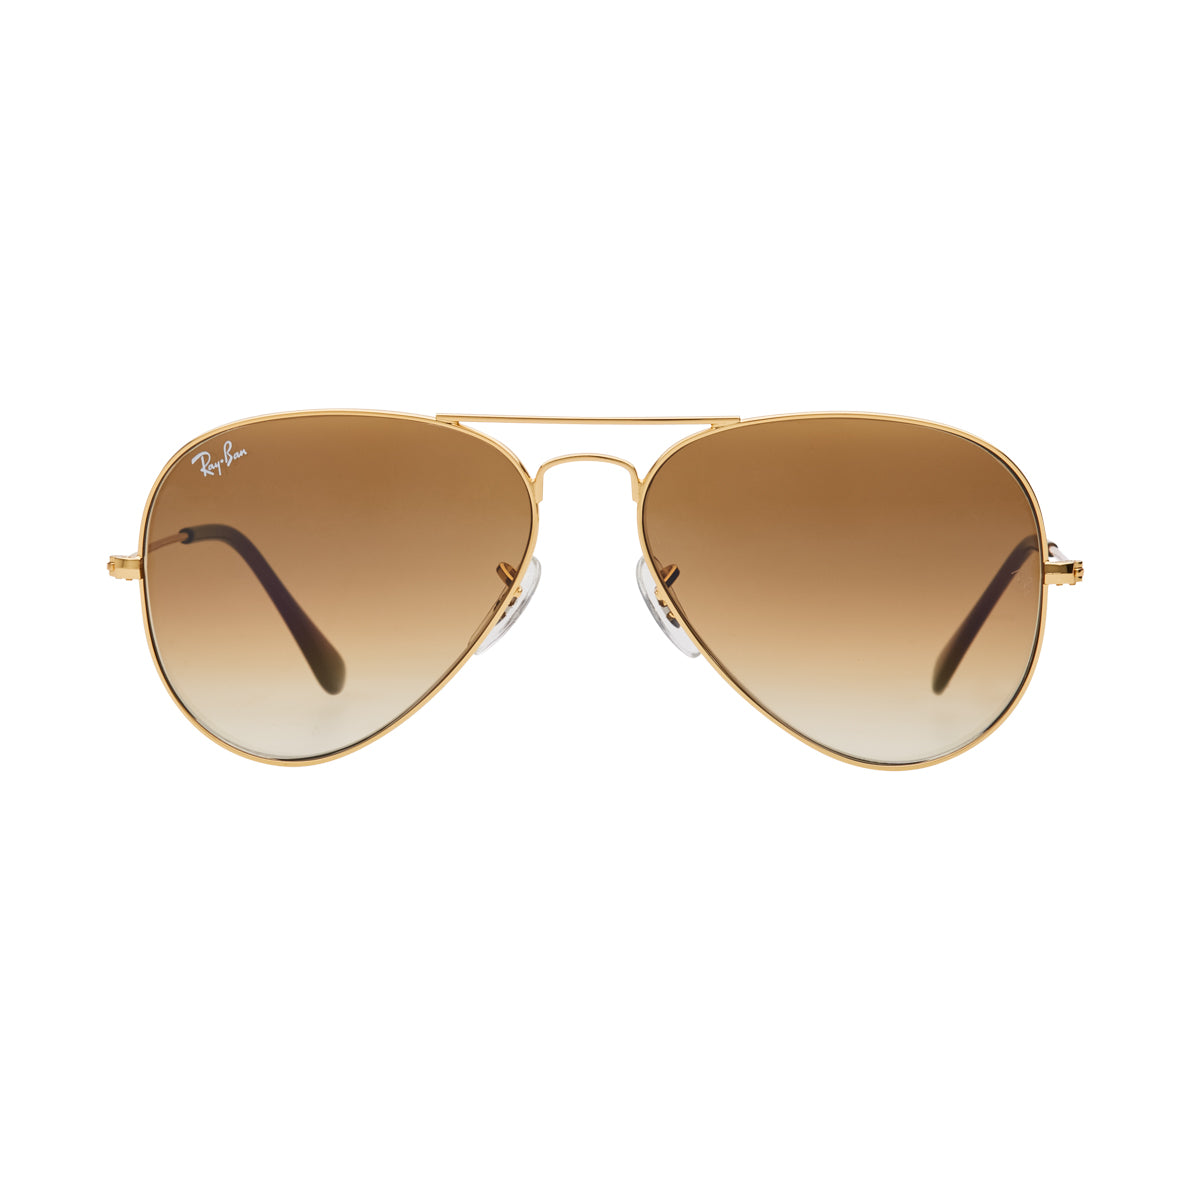 Ray-Ban Aviator Gradient RB3025 Sunglasses - Light Brown/Gold | MODE STORE